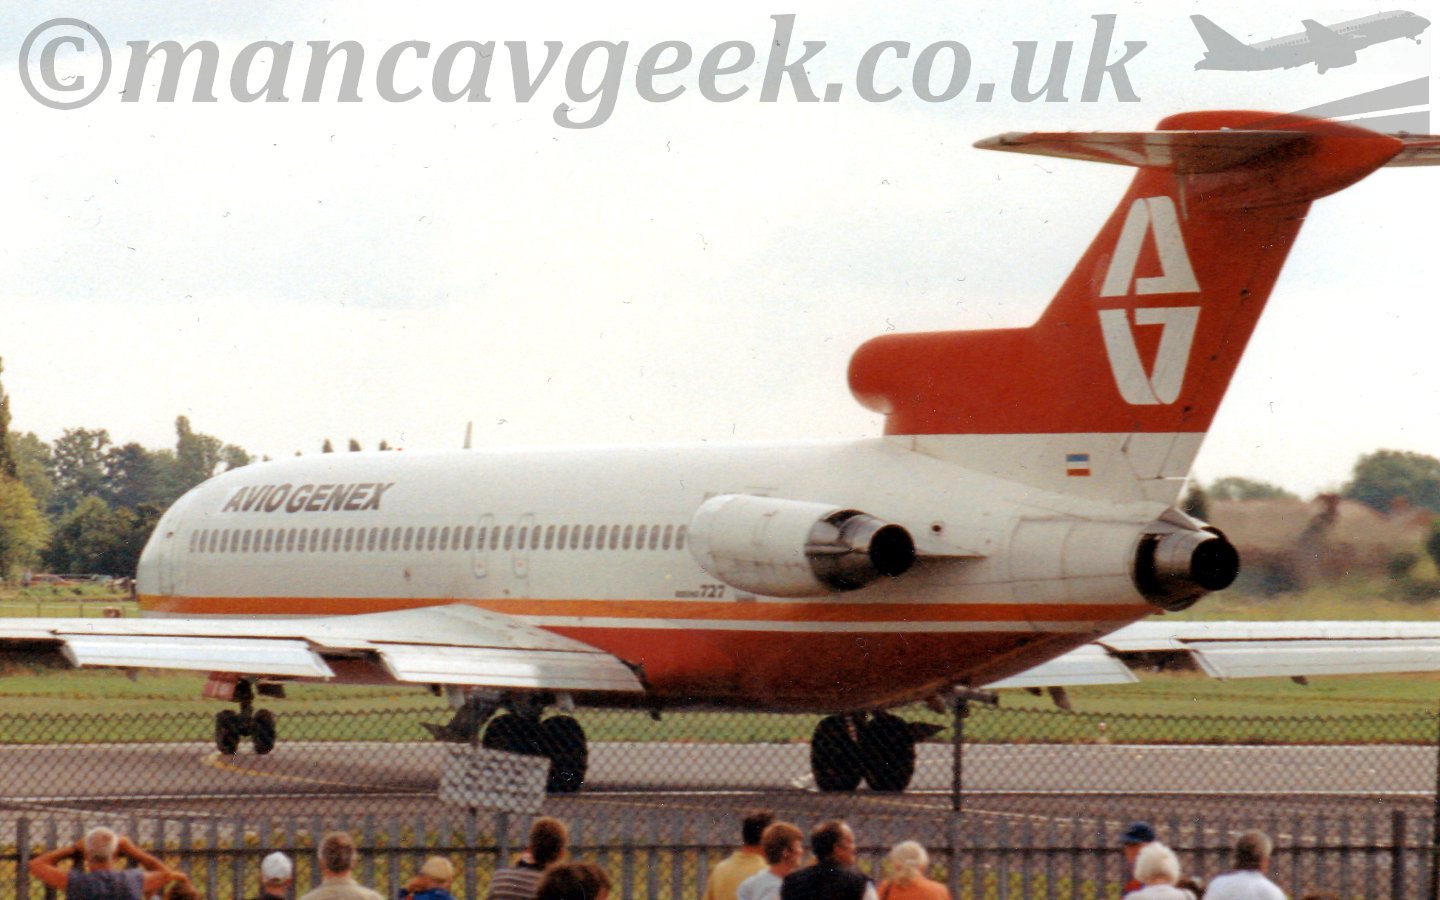 Rear-side view of a three- engined jet airliner with the engines mounted on the rear fuselage taxiing from right to left, turning to the right and away from the camera. The plane is mostly white, with an orange-brown belly, and an orange stripe running along the body. There are black "Aviogenex" titles on the upper forward fuselage. The tail is orange brown, with a stylised white letter "A" over it's reflection in the middle. In the foreground, a group of people are standing around, watching this plane through a chainlink fence topped with barbed wire, while the background is mostly grass and trees at the airfields perimeter, under a grey sky.